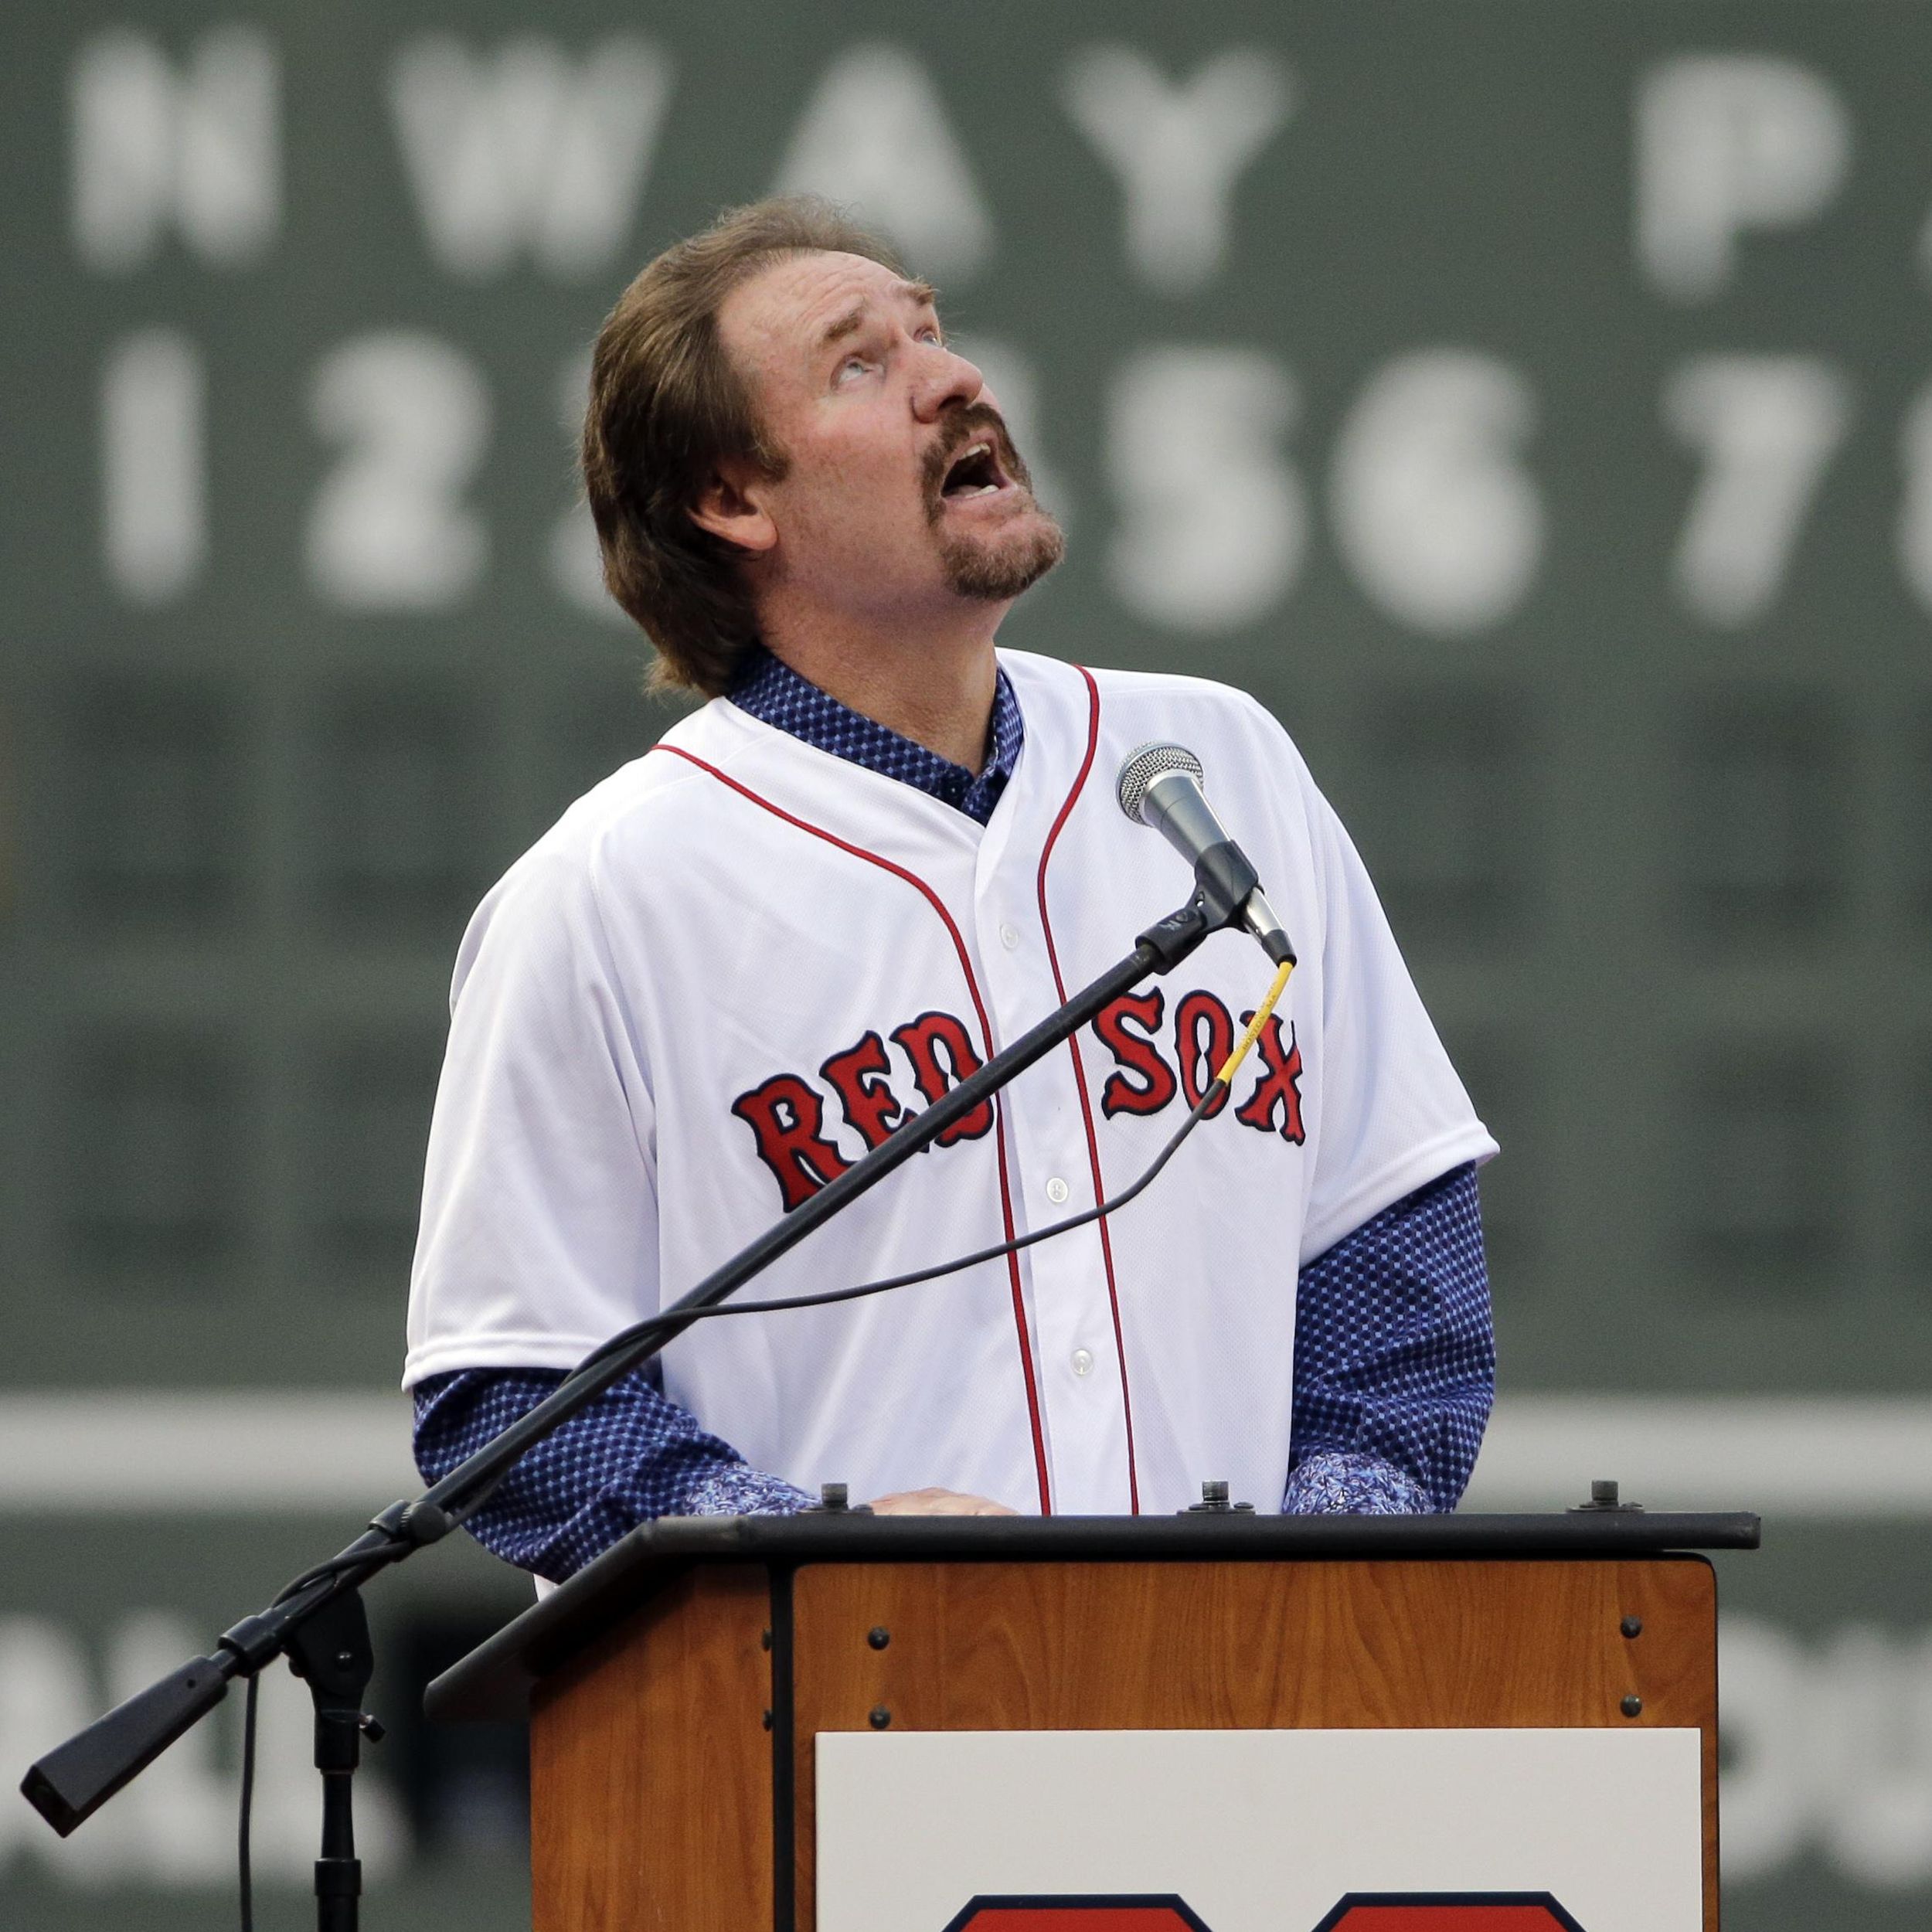 Forget the horsey ride and retire Wade Boggs' number already